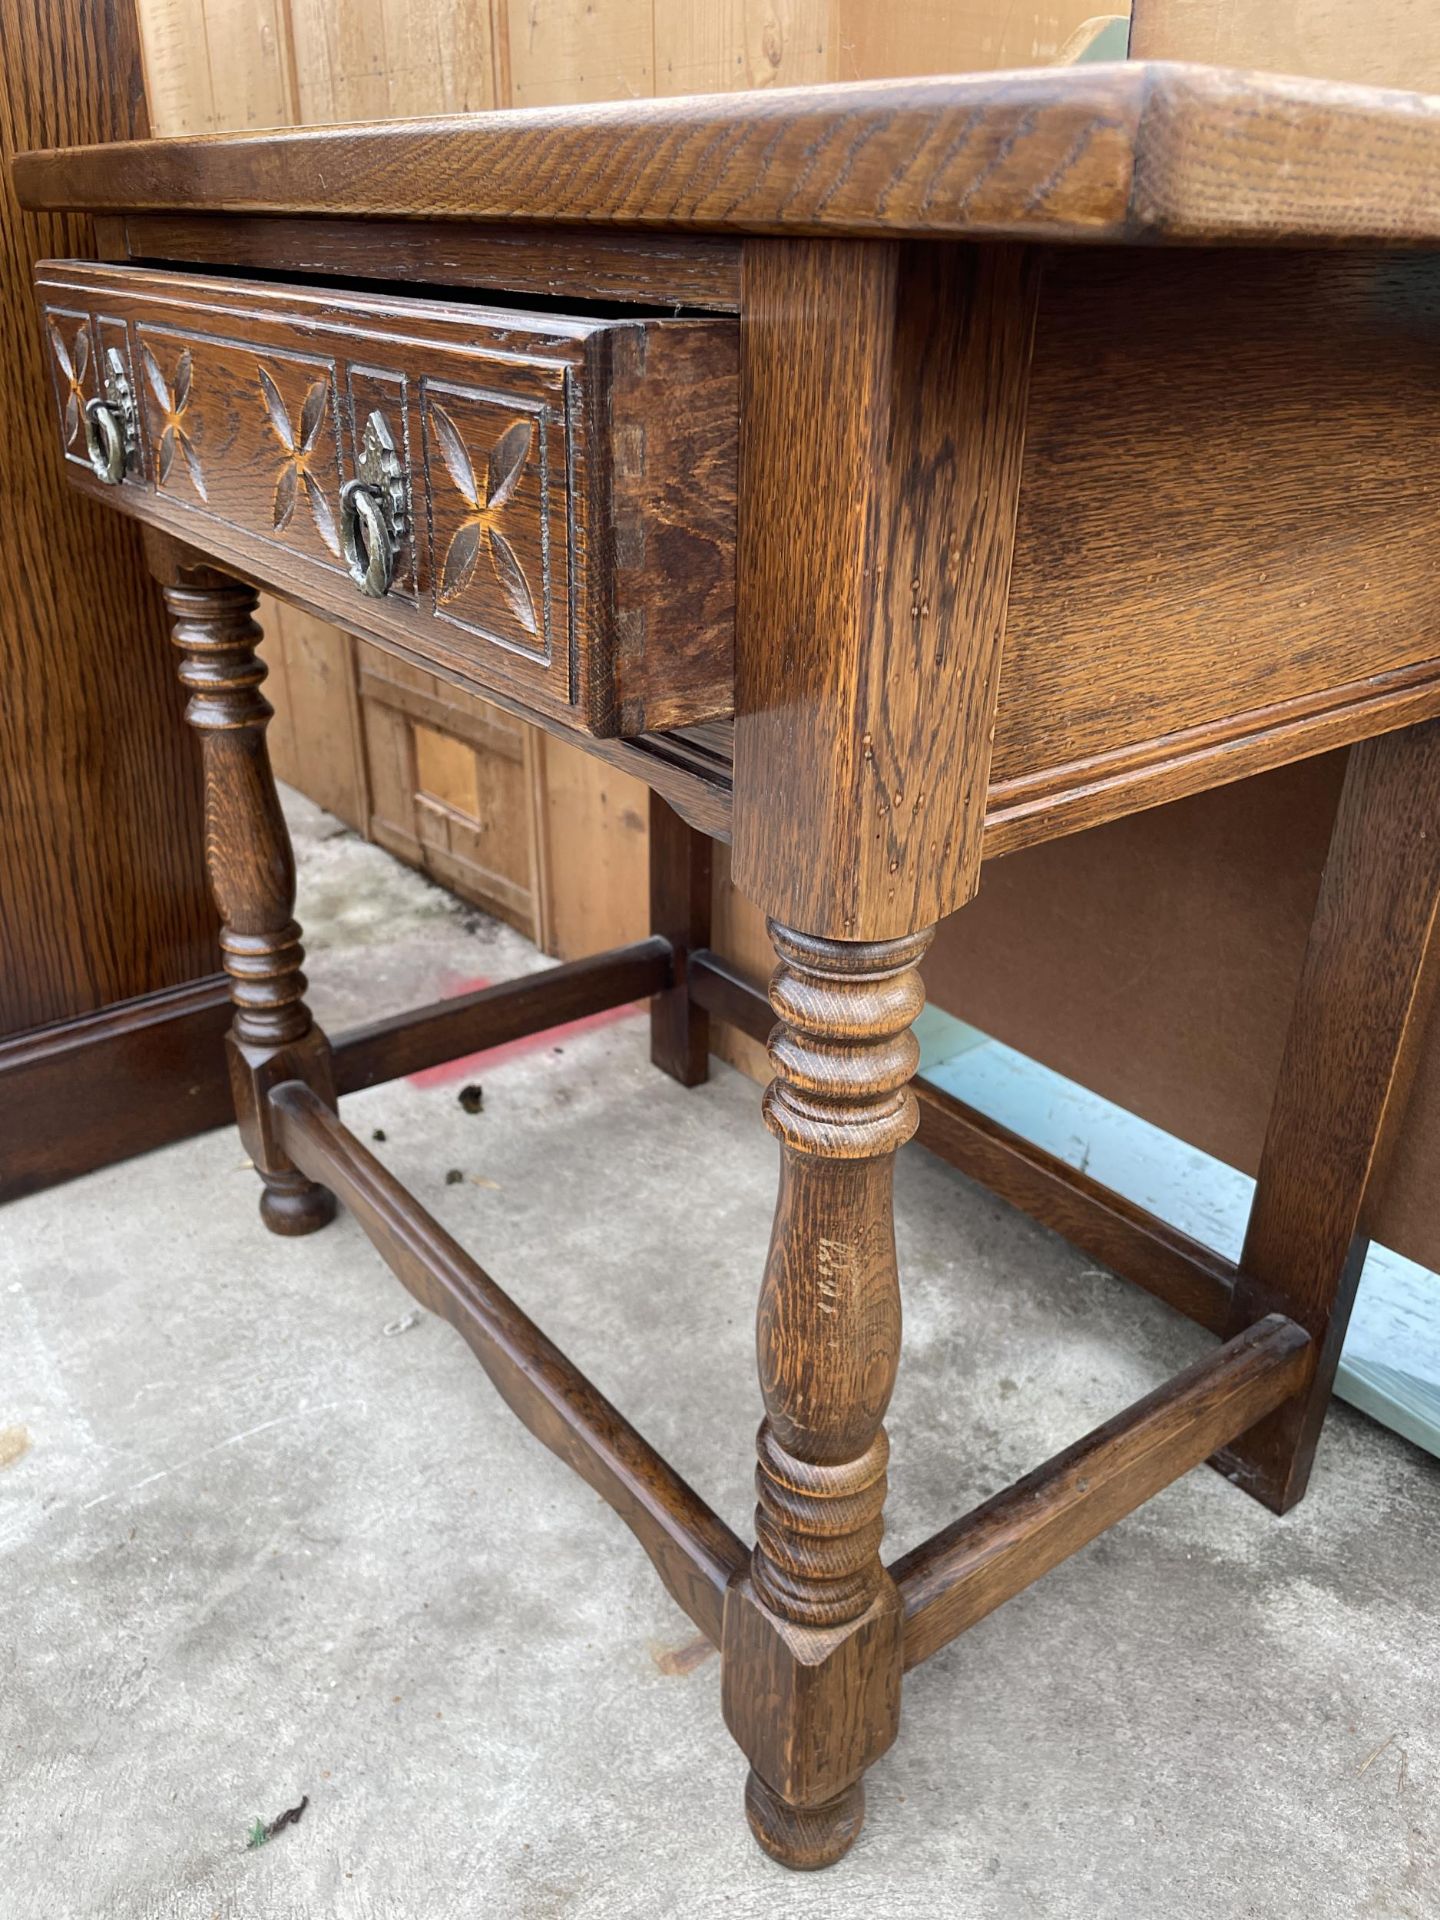 AN OAK JACOBEAN STYLE SIDE-TABLE WITH SINGLE DRAWER ON TURNED FRONT LEGS, 32" WIDE - Image 3 of 3